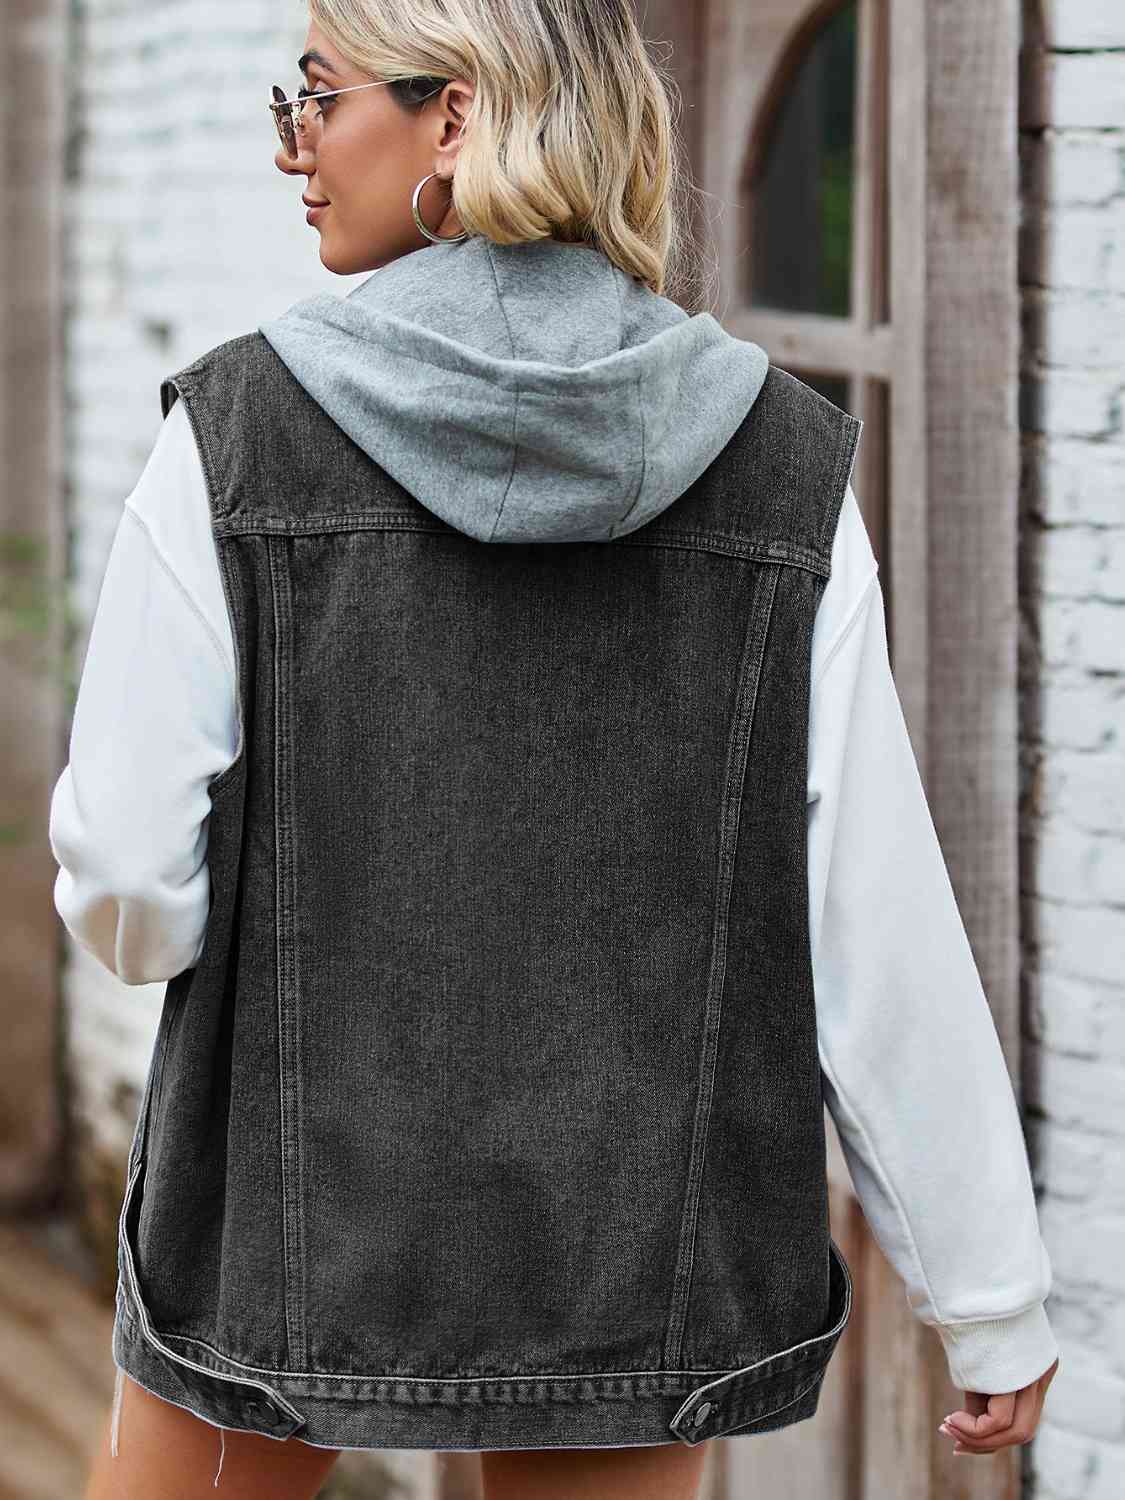 Dark Slate Gray Button Up Sleeveless Denim Jacket with Pockets Sentient Beauty Fashions Apparel & Accessories